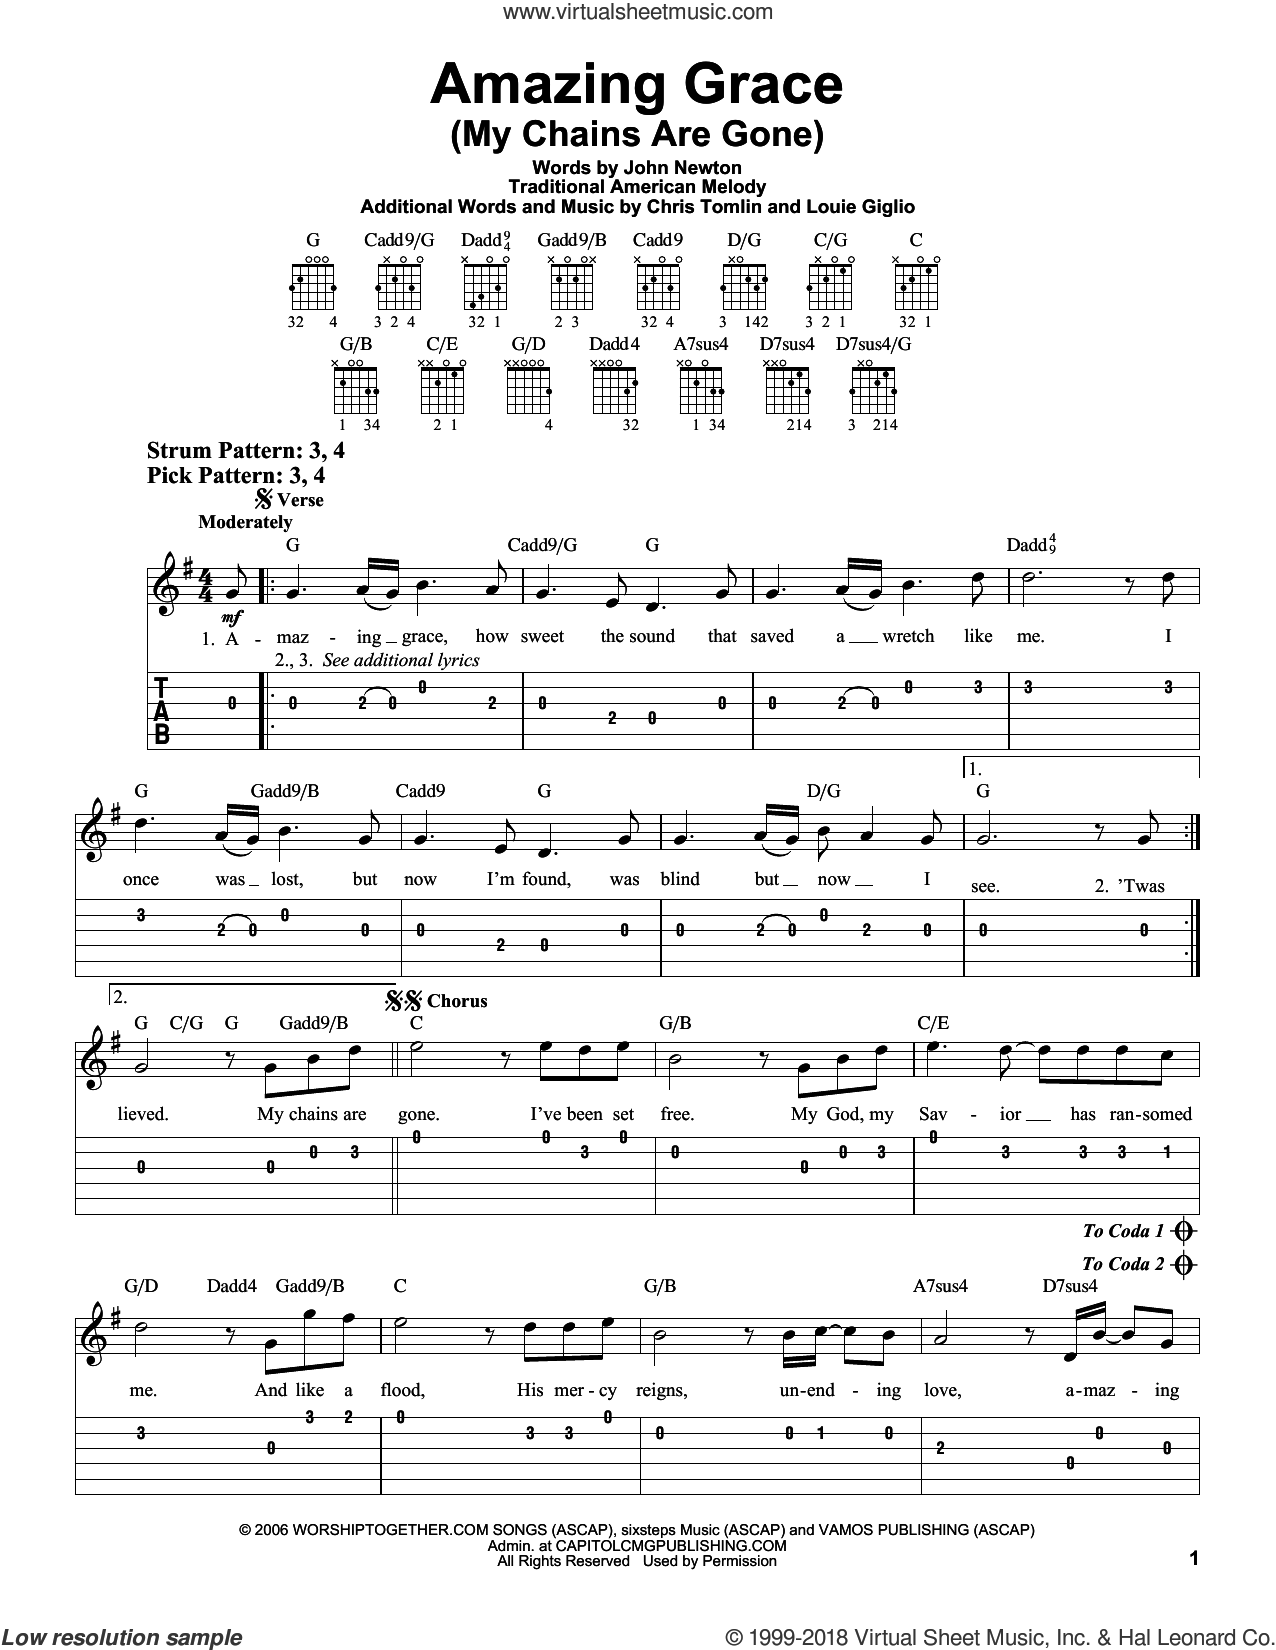 Amazing grace by chris tomlin chords